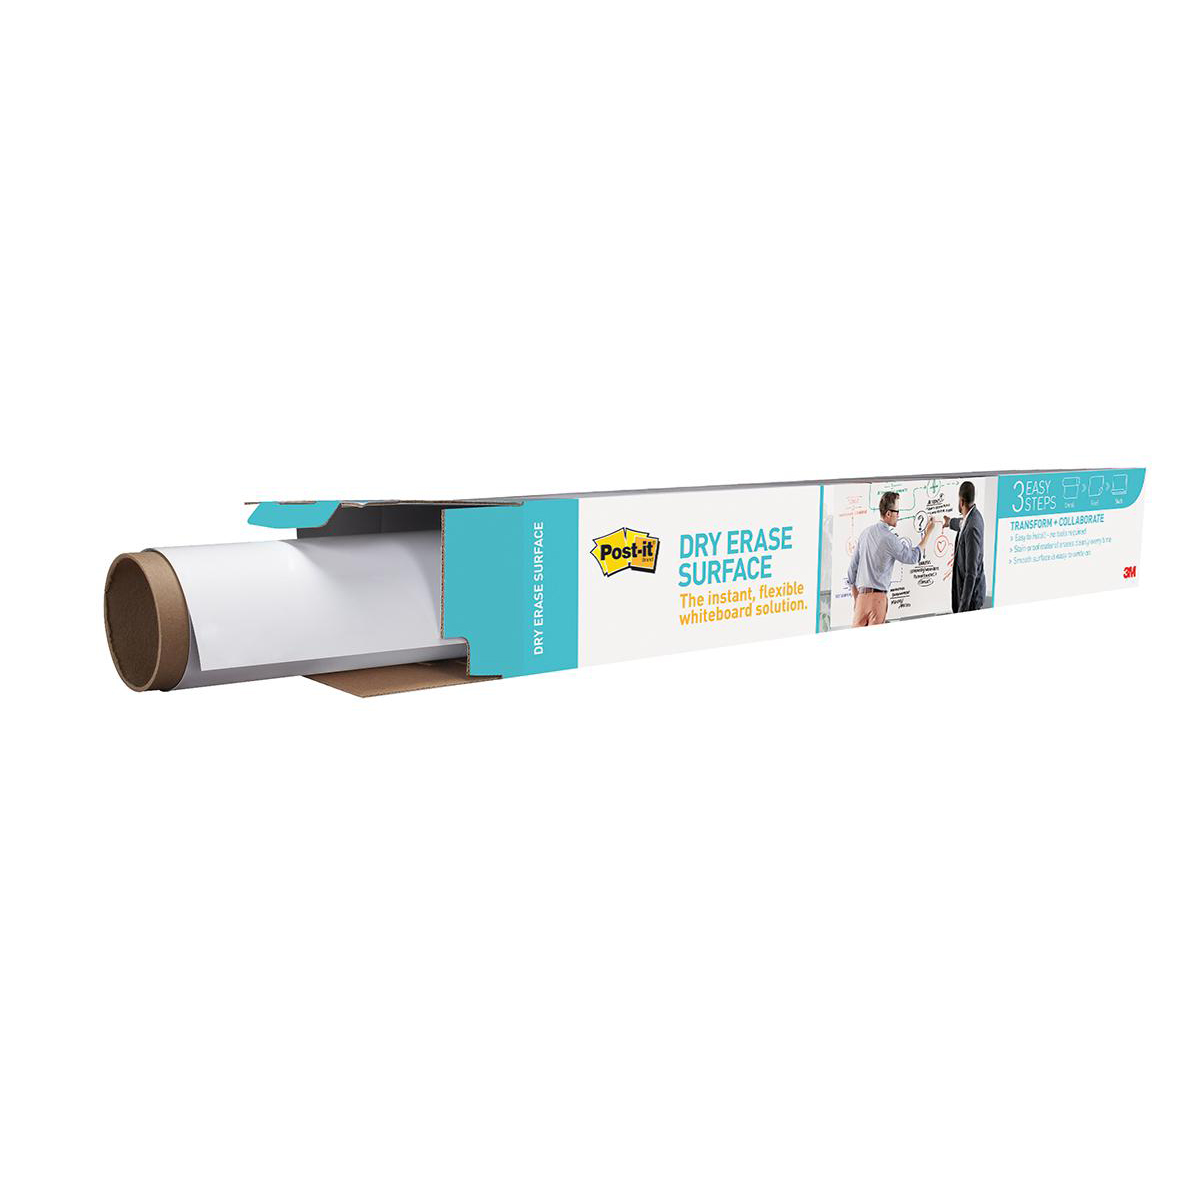  Post-It® Dry Erase Surface 